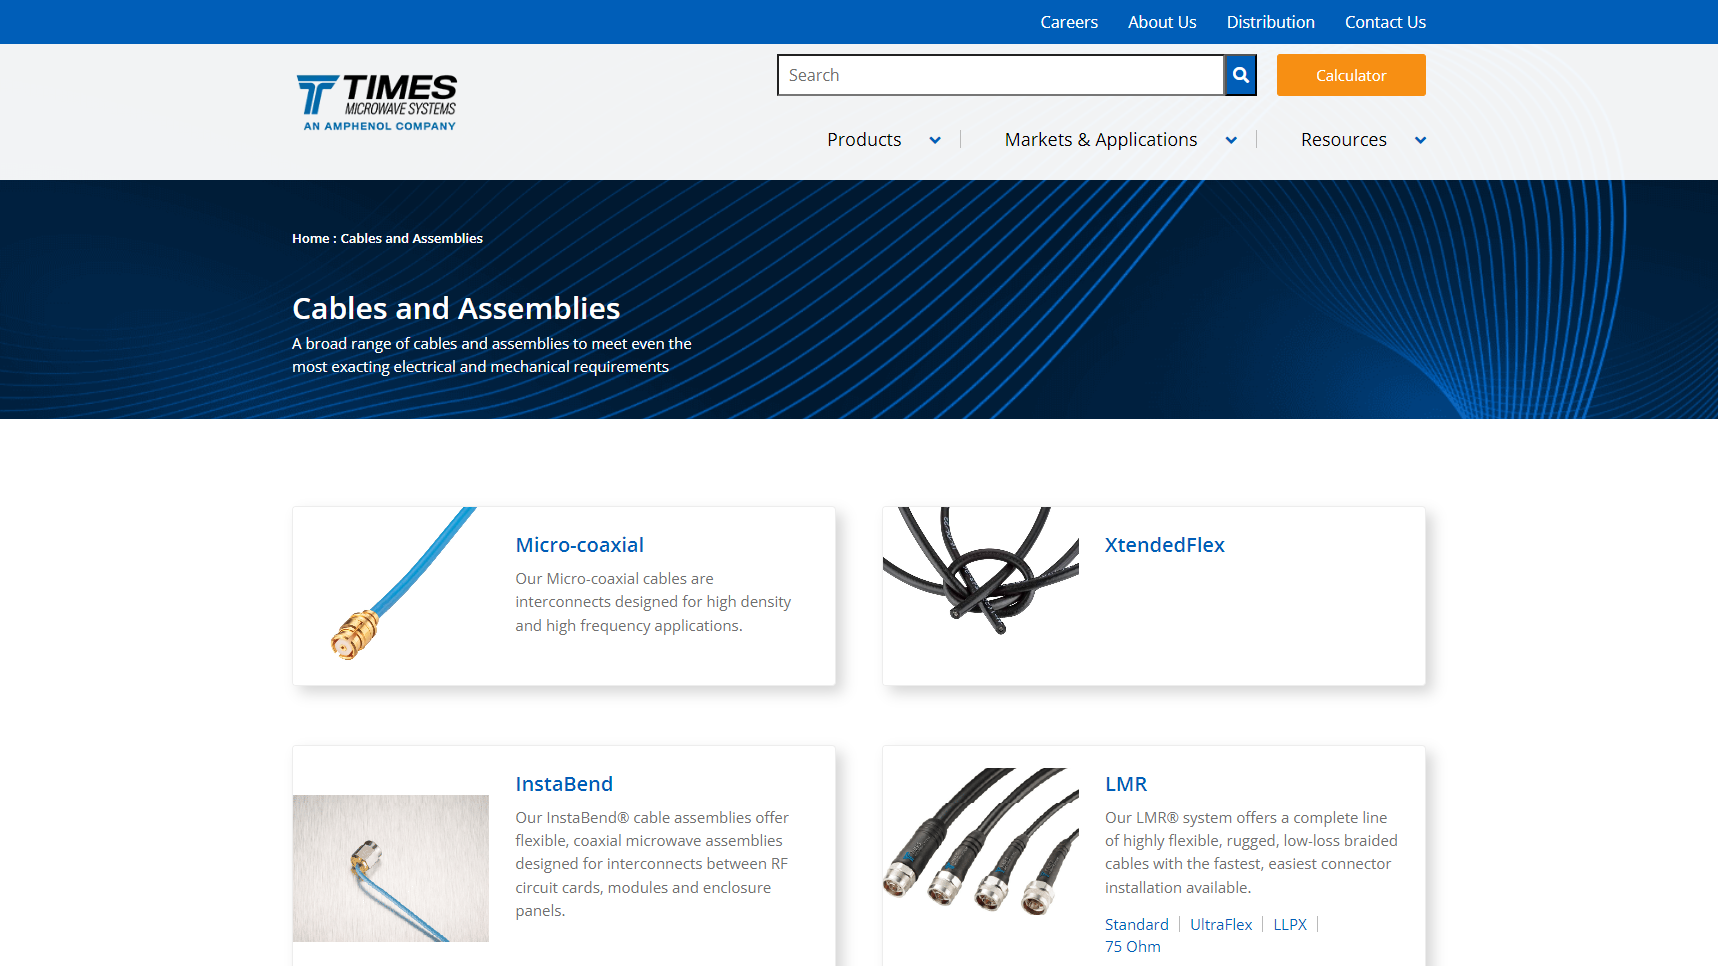 Times Microwave Systems - Coaxial Cable Manufacturer